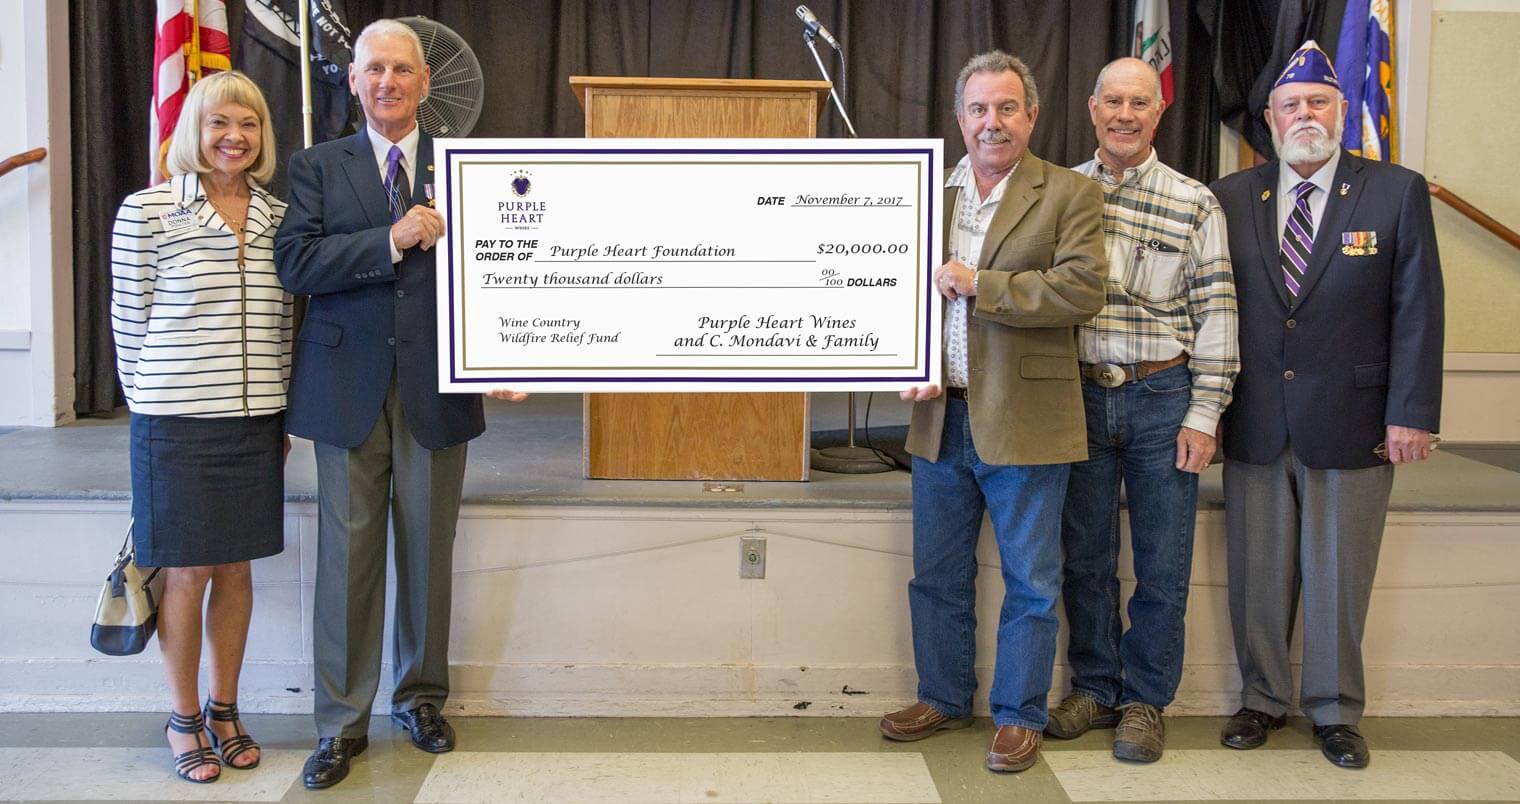 Wildfire Relief Check Presentation, featured image